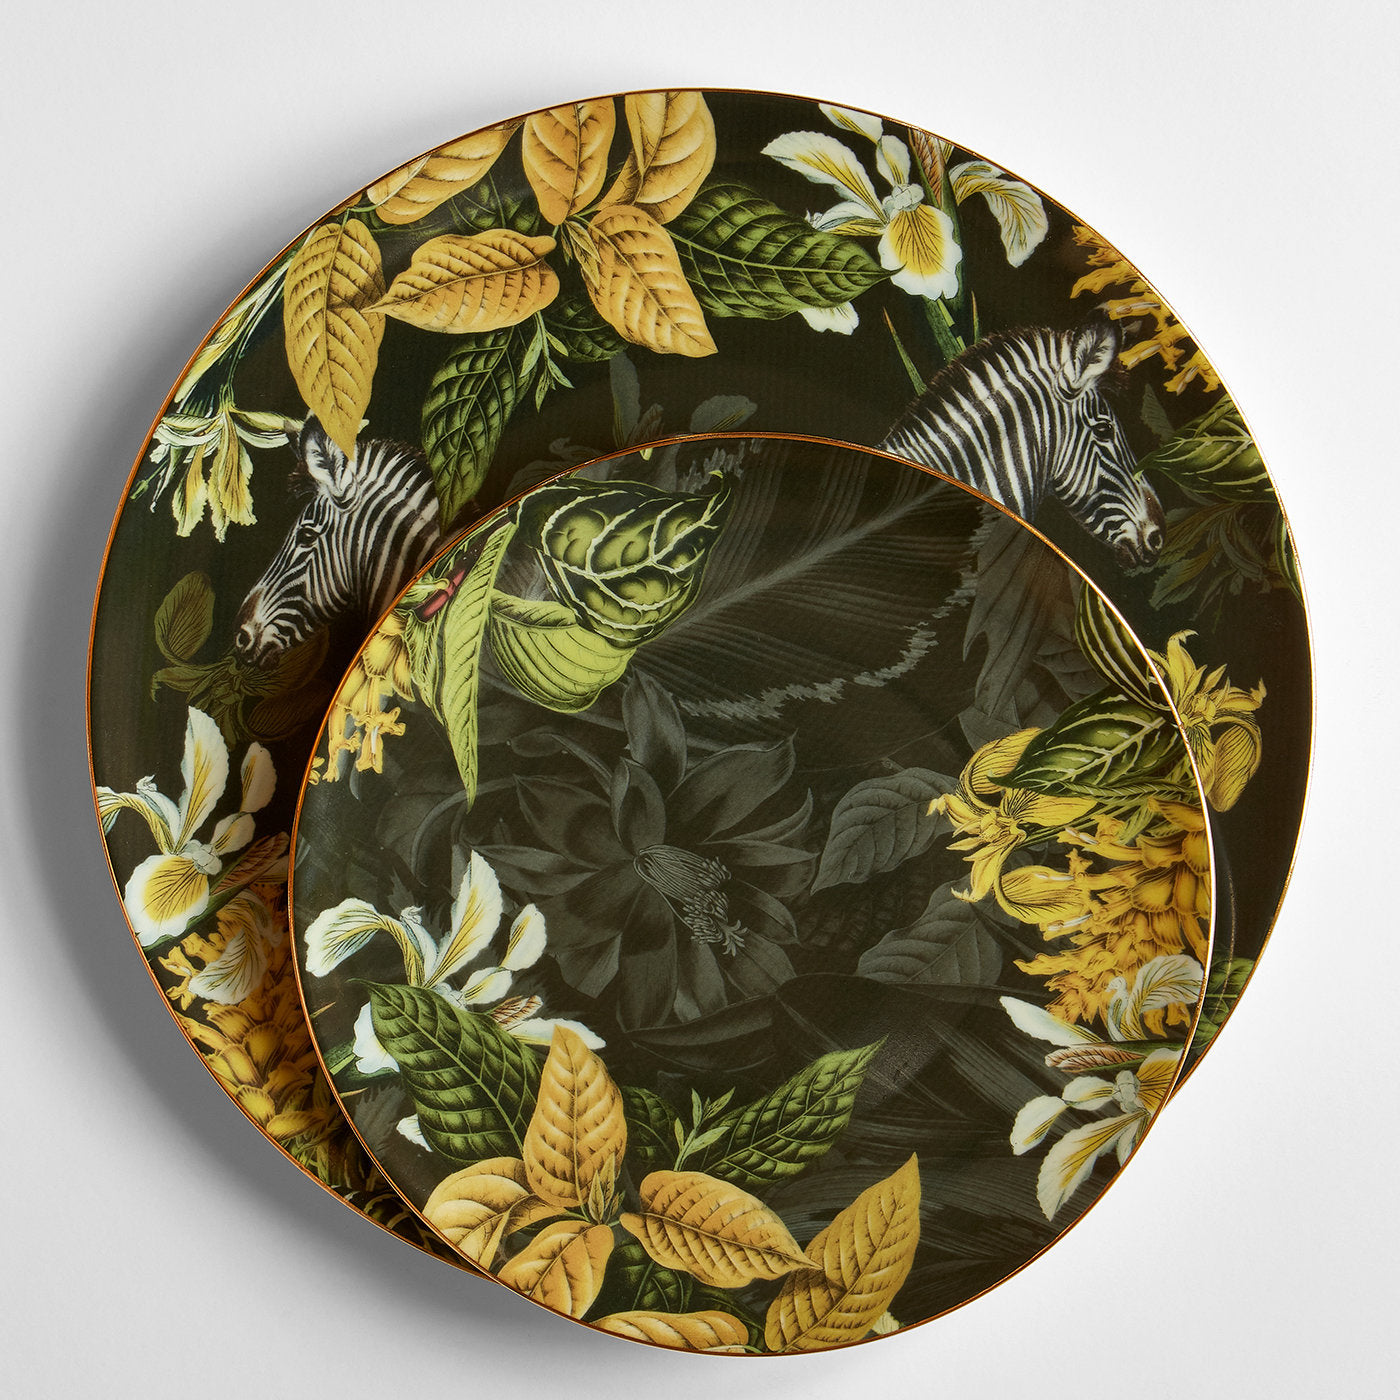 Animalia Porcelain Dinner Plate With Zebra And Yellow Flowers - Alternative view 1